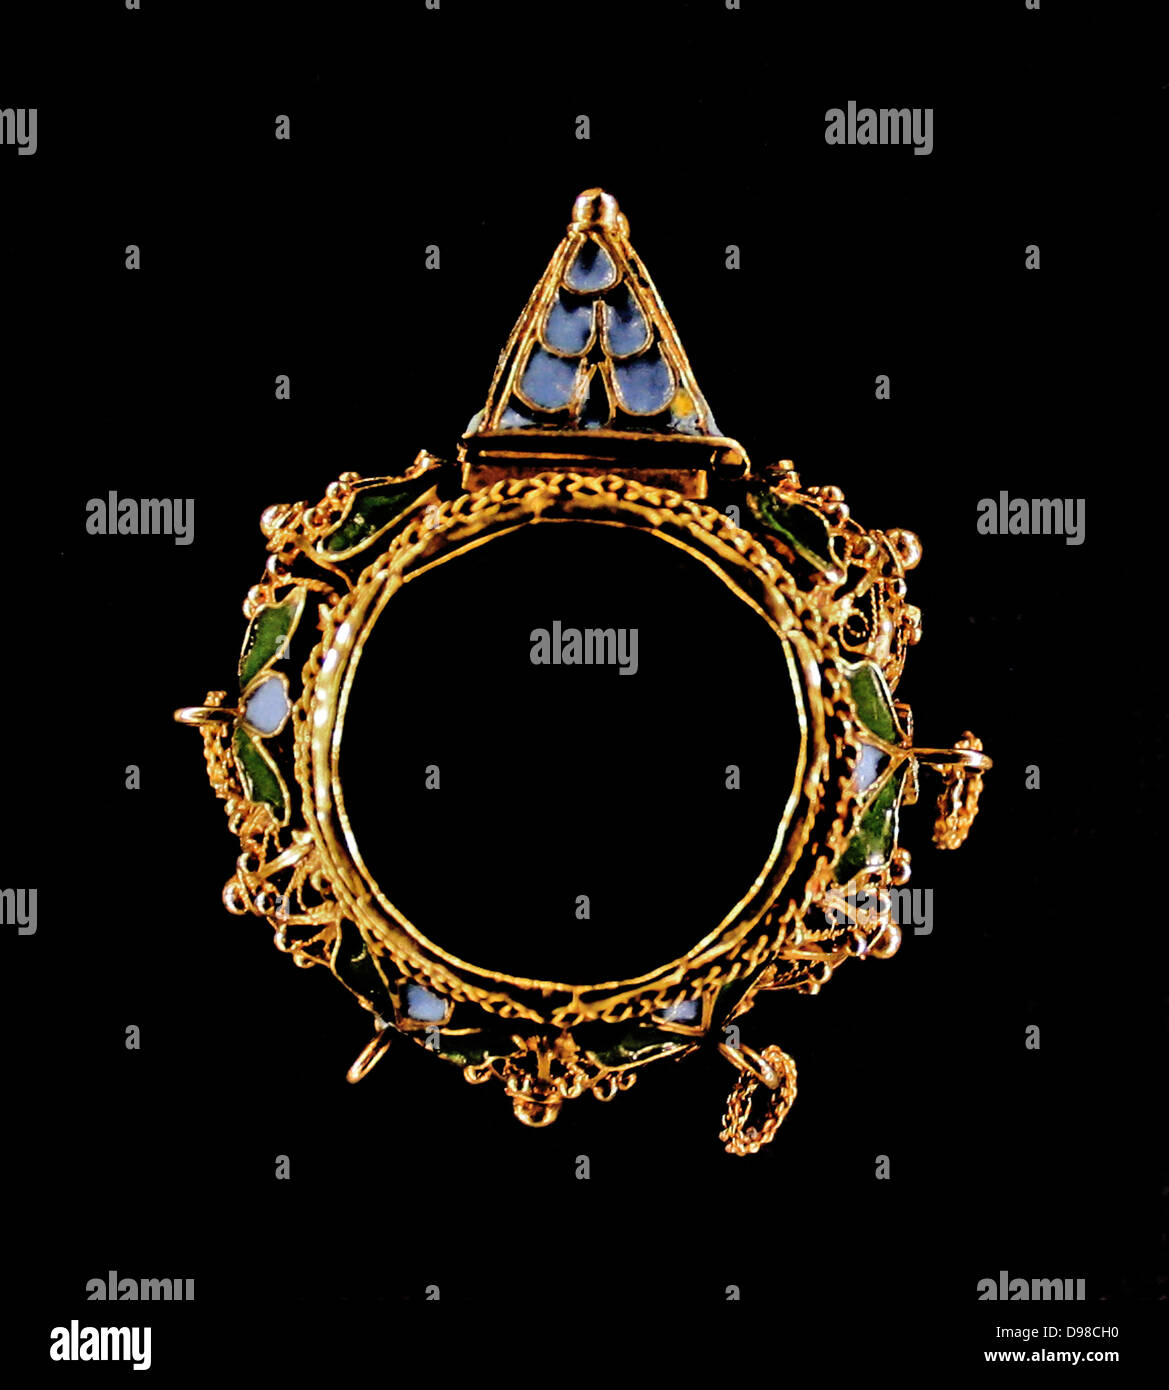 Gold ring, the bezel set with a crystal engraved with a shield of arms opening on a hinge showing a compass and dial.  Gold Stock Photo